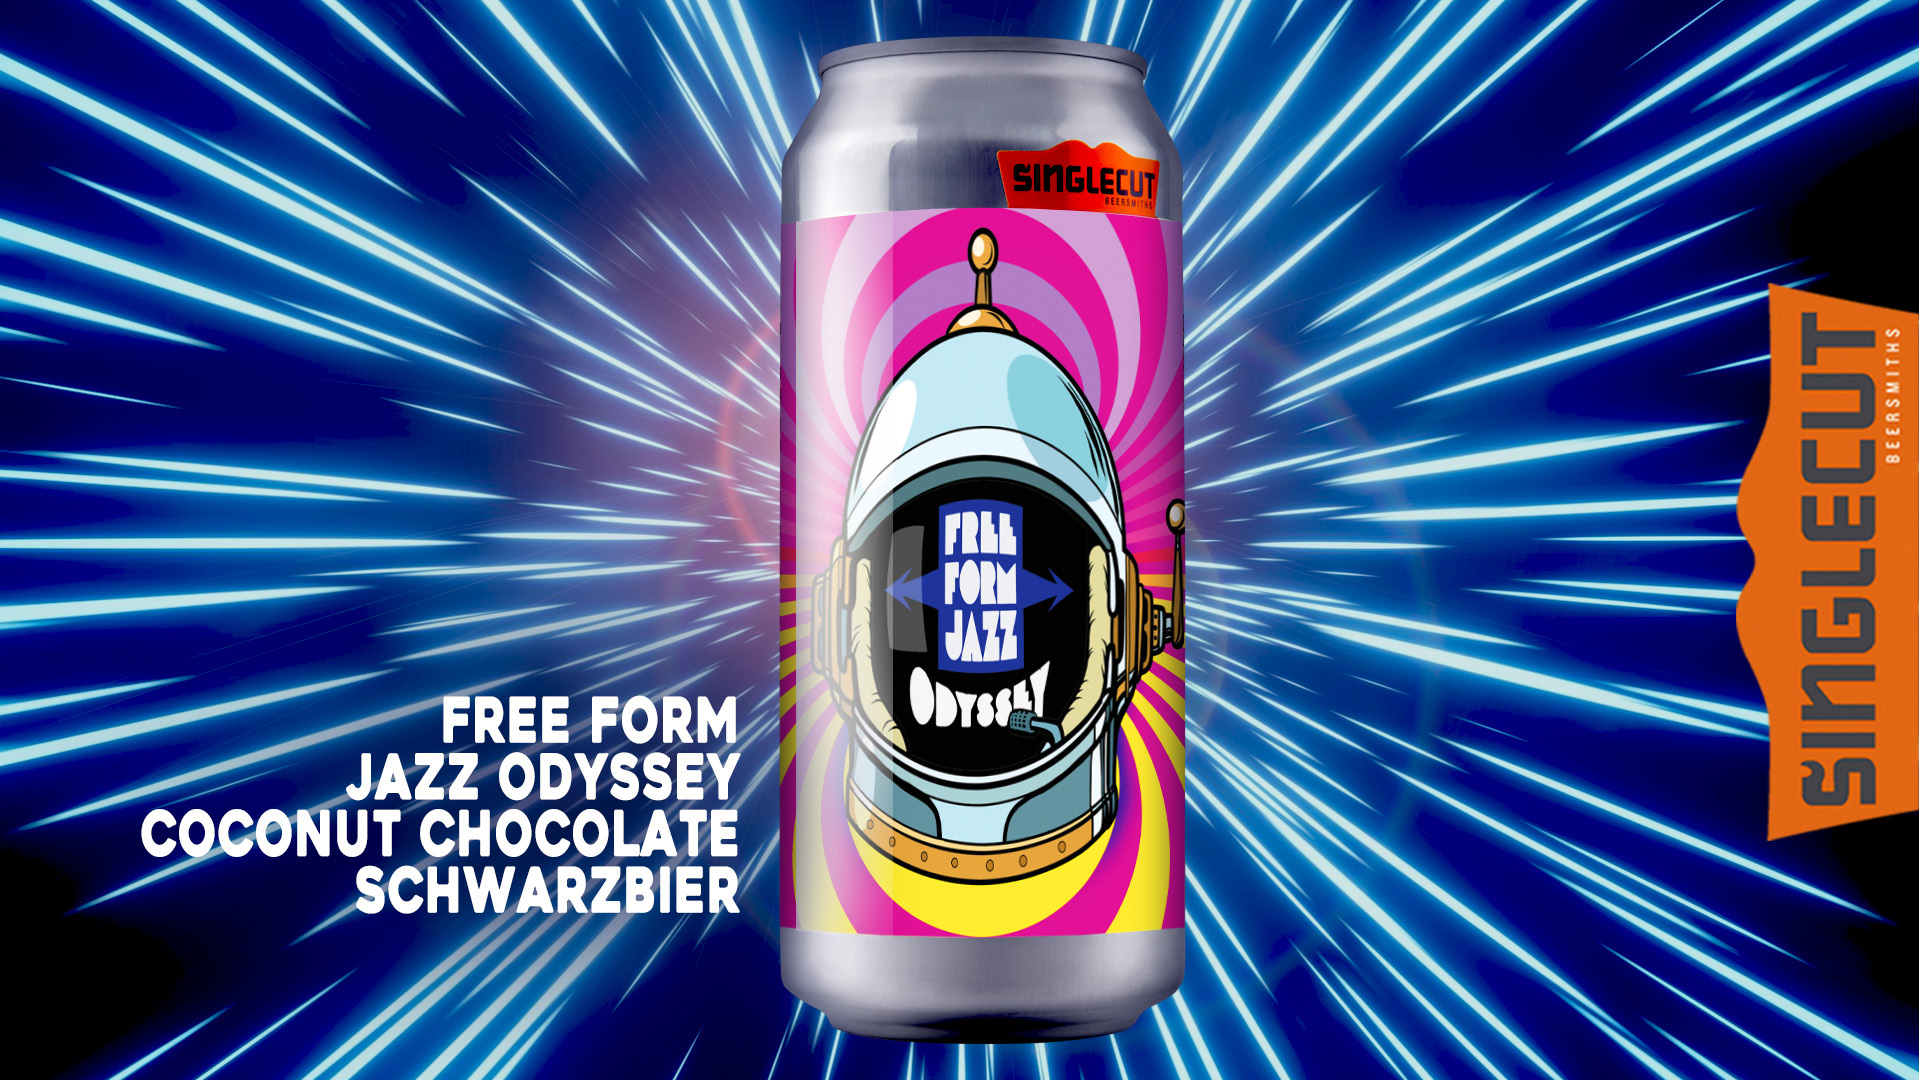 illustration of a beer can with an illustration of an astronaut's helmet  floating in a spacescape with the words "Free Form Jazz Odyssey Coconut Chocolate Schwarzbier